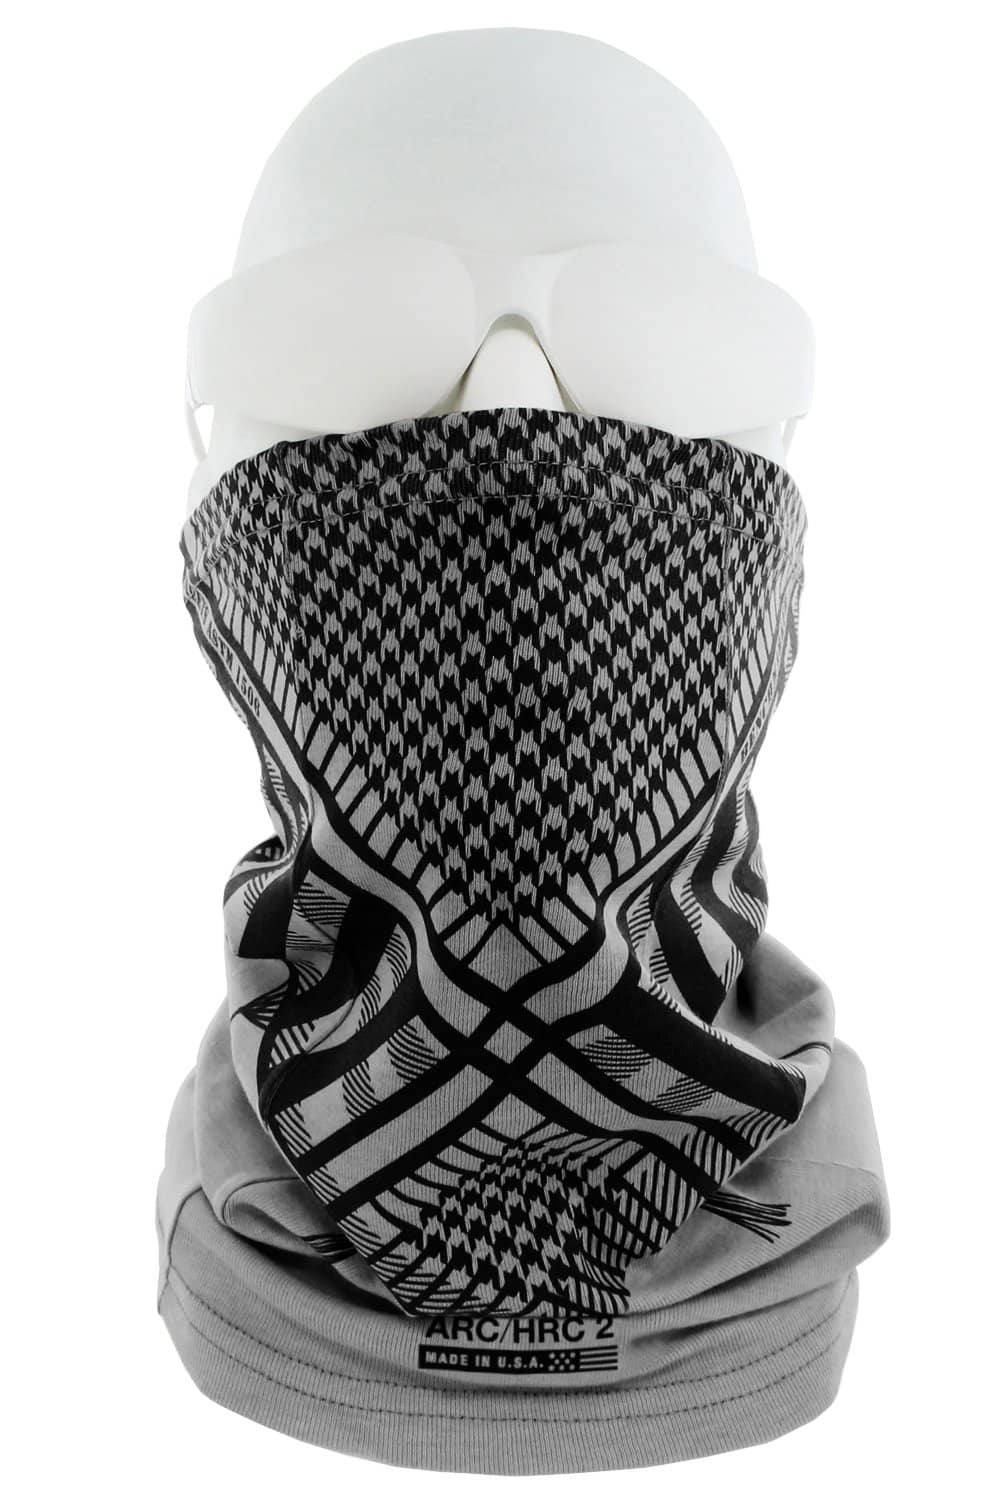 CAT 2 FR American Shemagh Gray Neck Gaiter